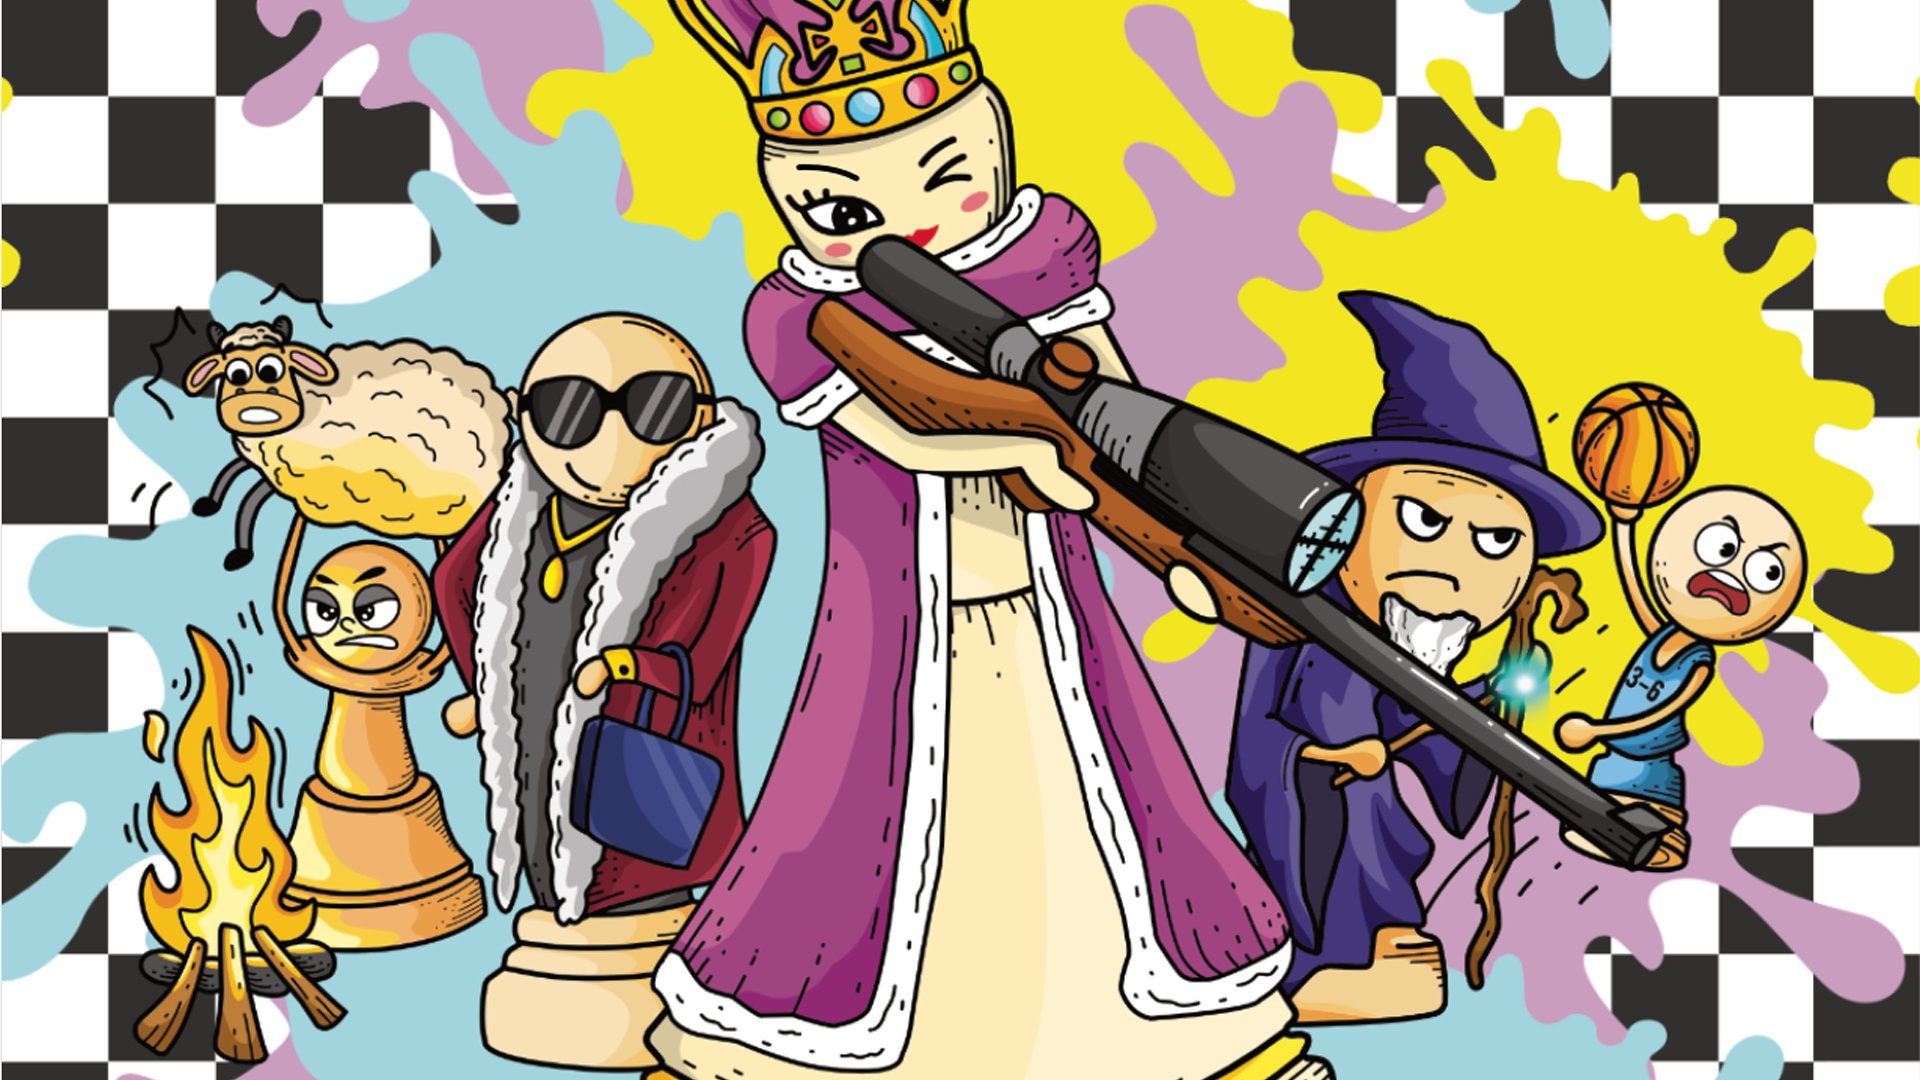 Image for Not Chess remixes classic chess into a party game with zombies, teleportation and a sniper rifle queen